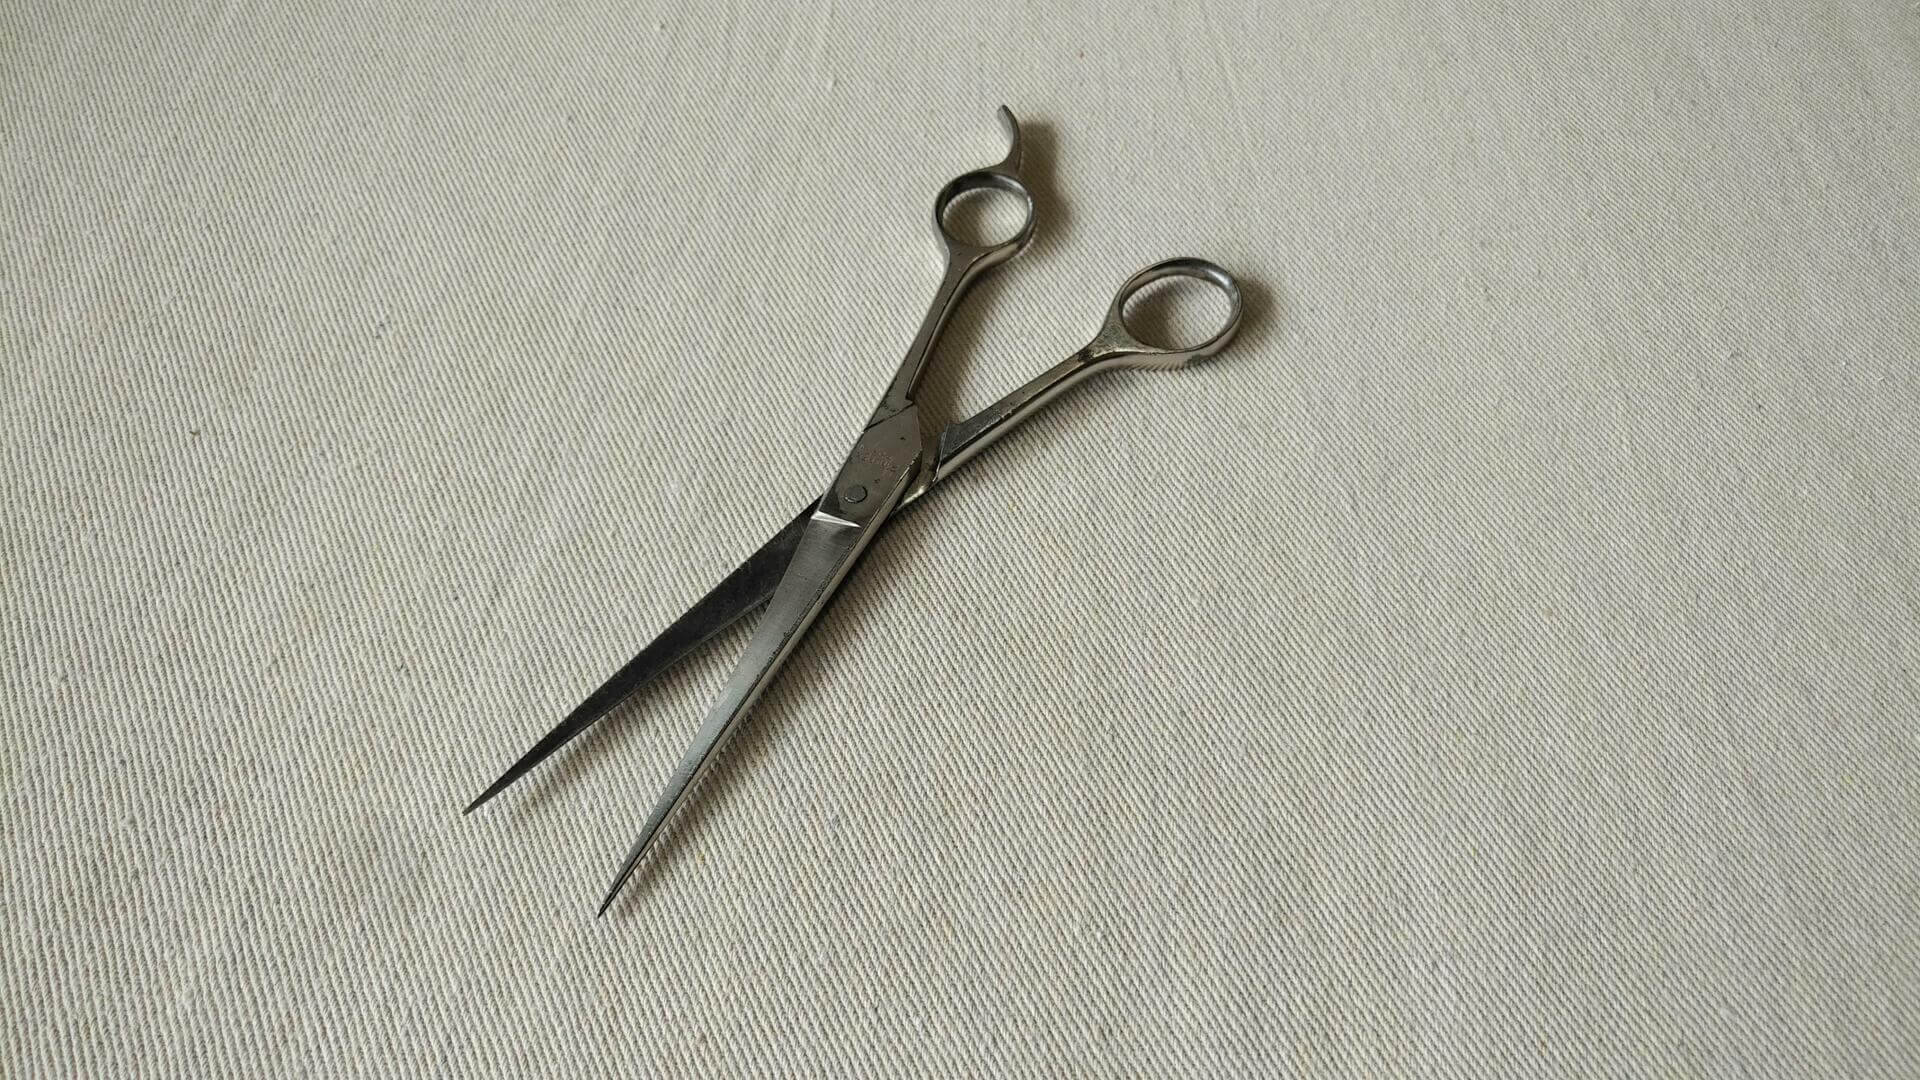 Vintage Panamex Fermarud hair cutting and thinning scissors shears 7 inches long. Antique made in Italy collectible hairdresser and barber tools & supplies